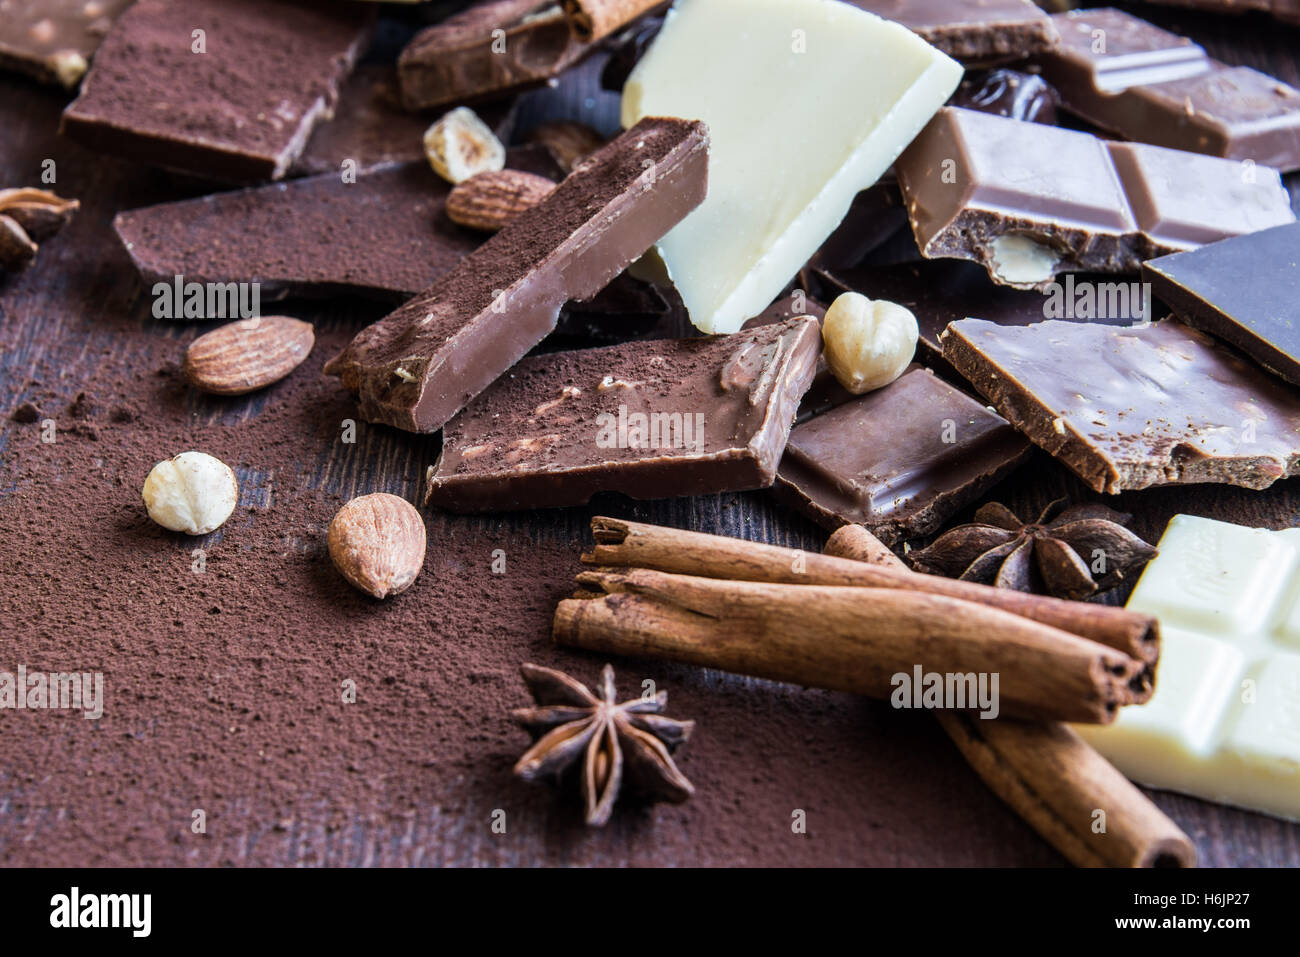 Close up of a heap of various chocolate pieces over dark wood background. Dark, milk, white and nuts chocolate bars. Cinnamon, s Stock Photo